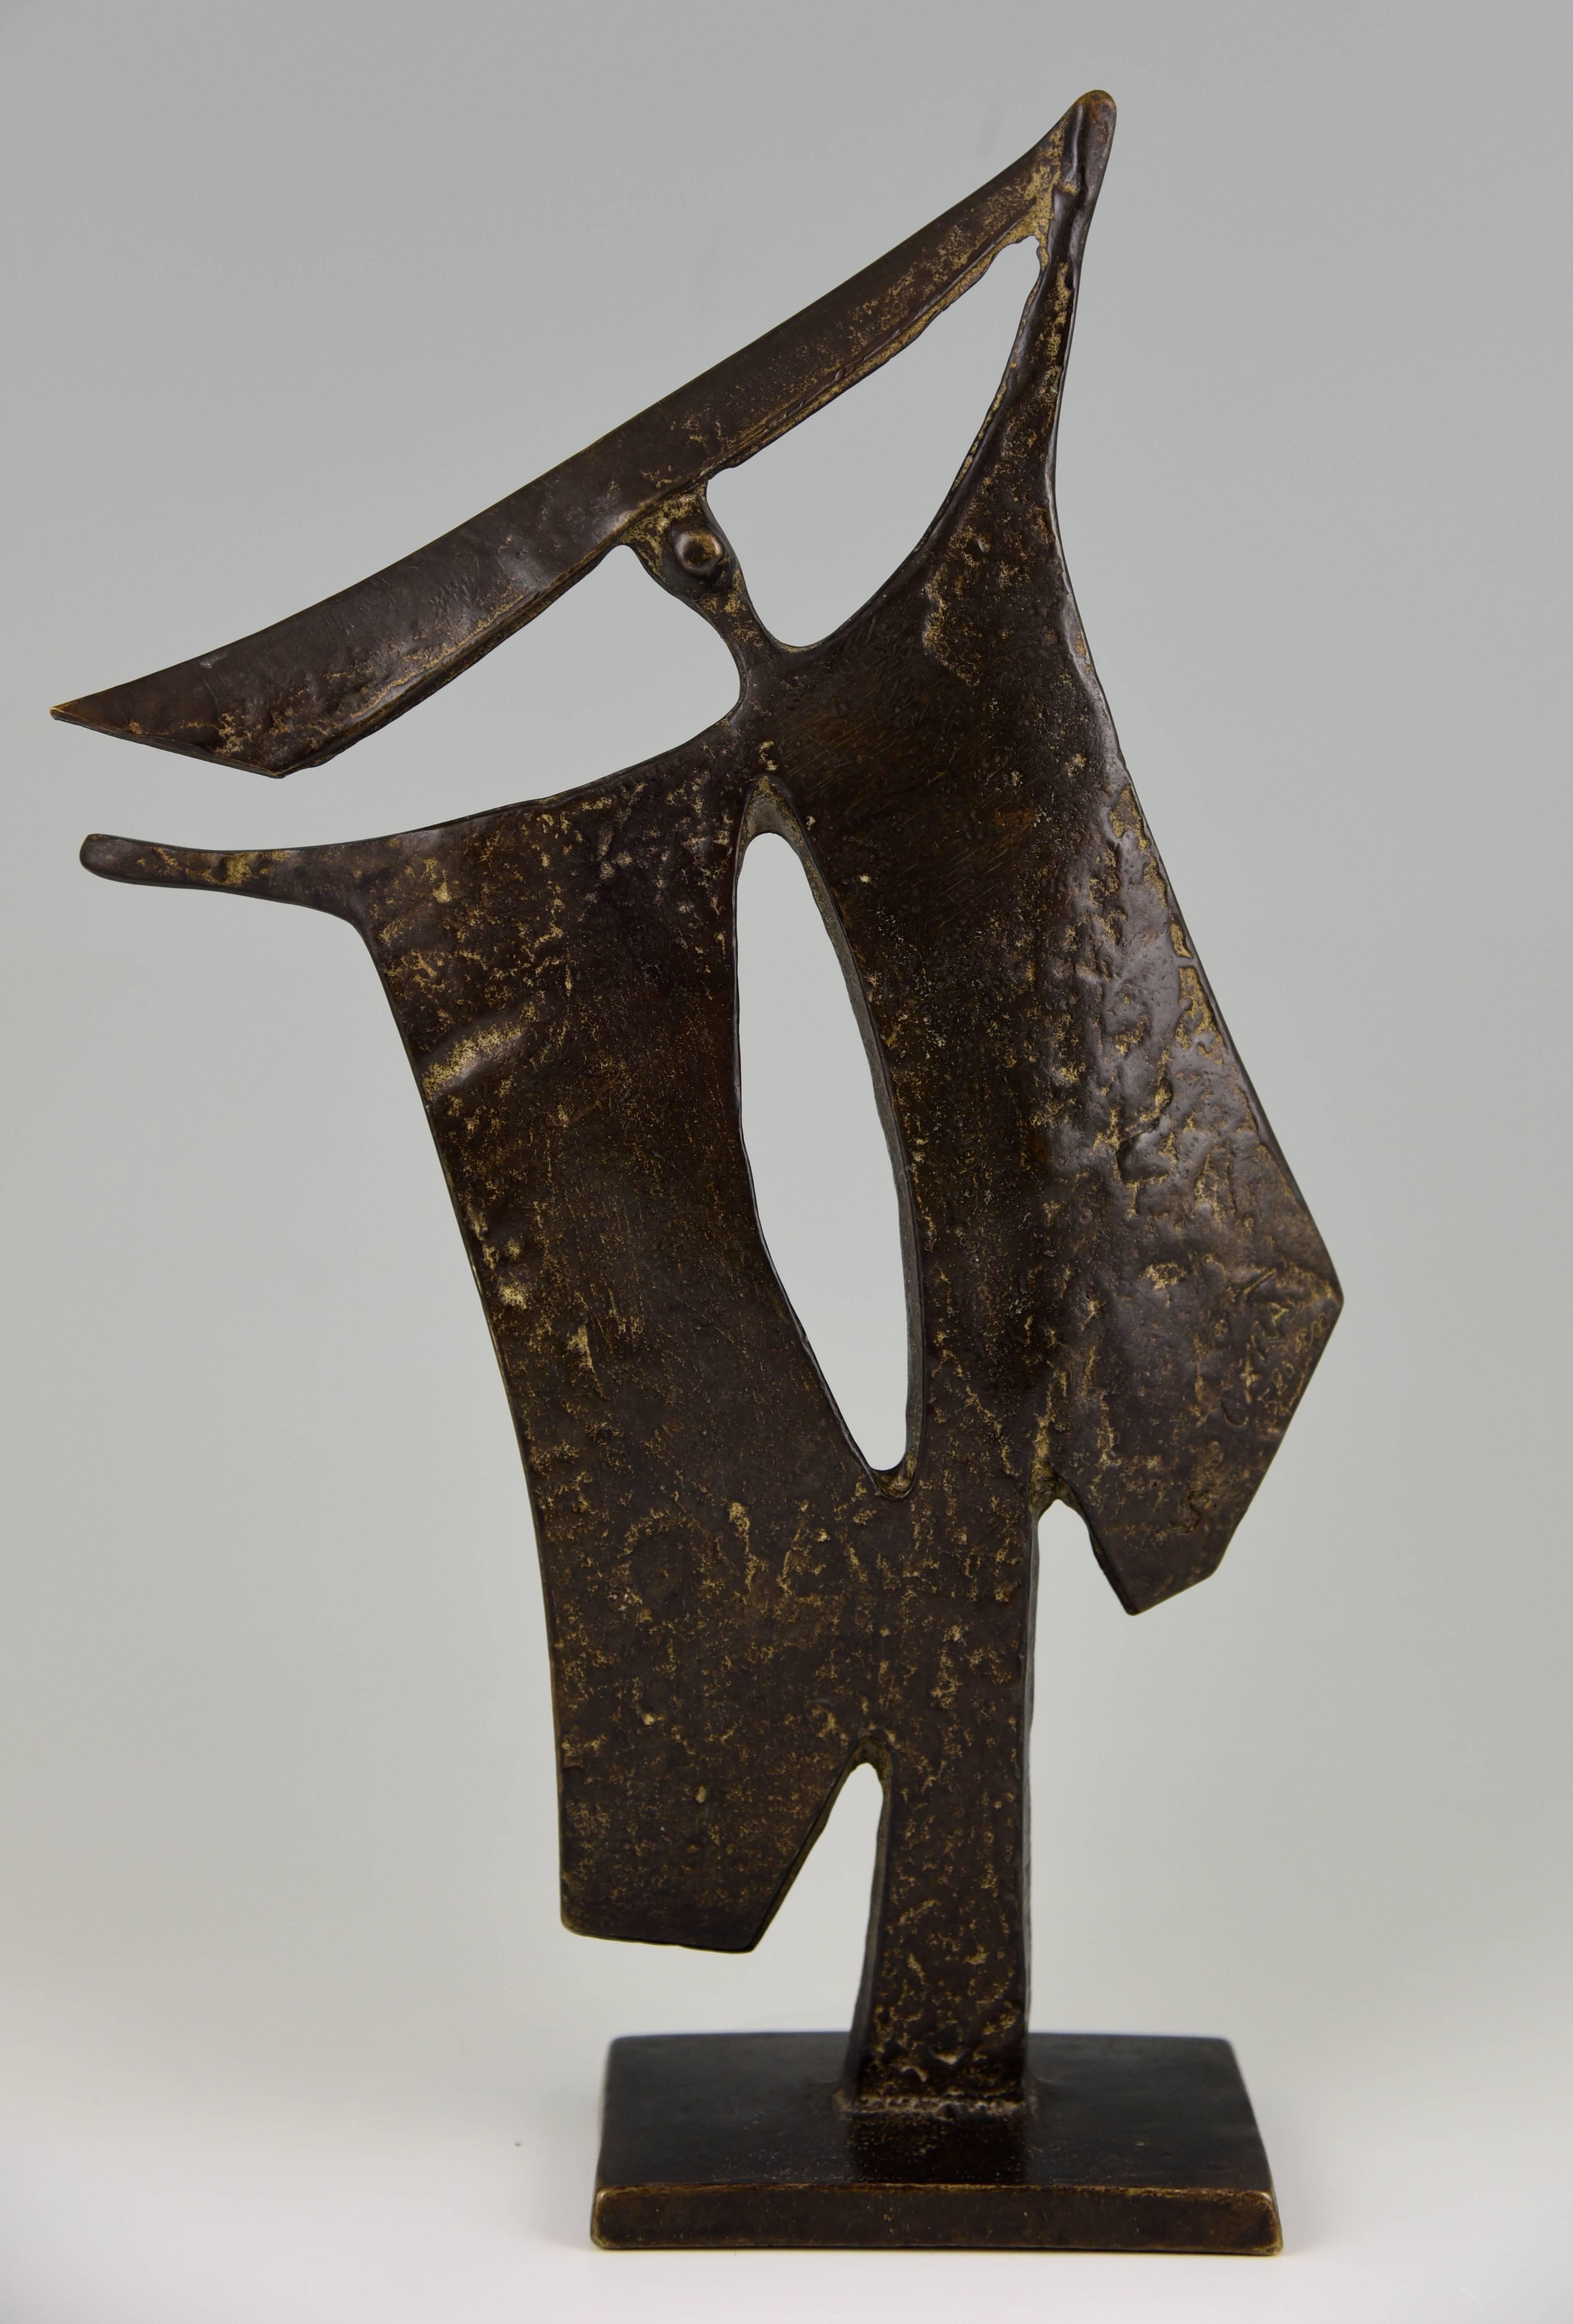 Mid-Century Modern Bronze Sculpture of a Woman by Ugo Cara, Trieste Italy, 1960 Signed Numbered